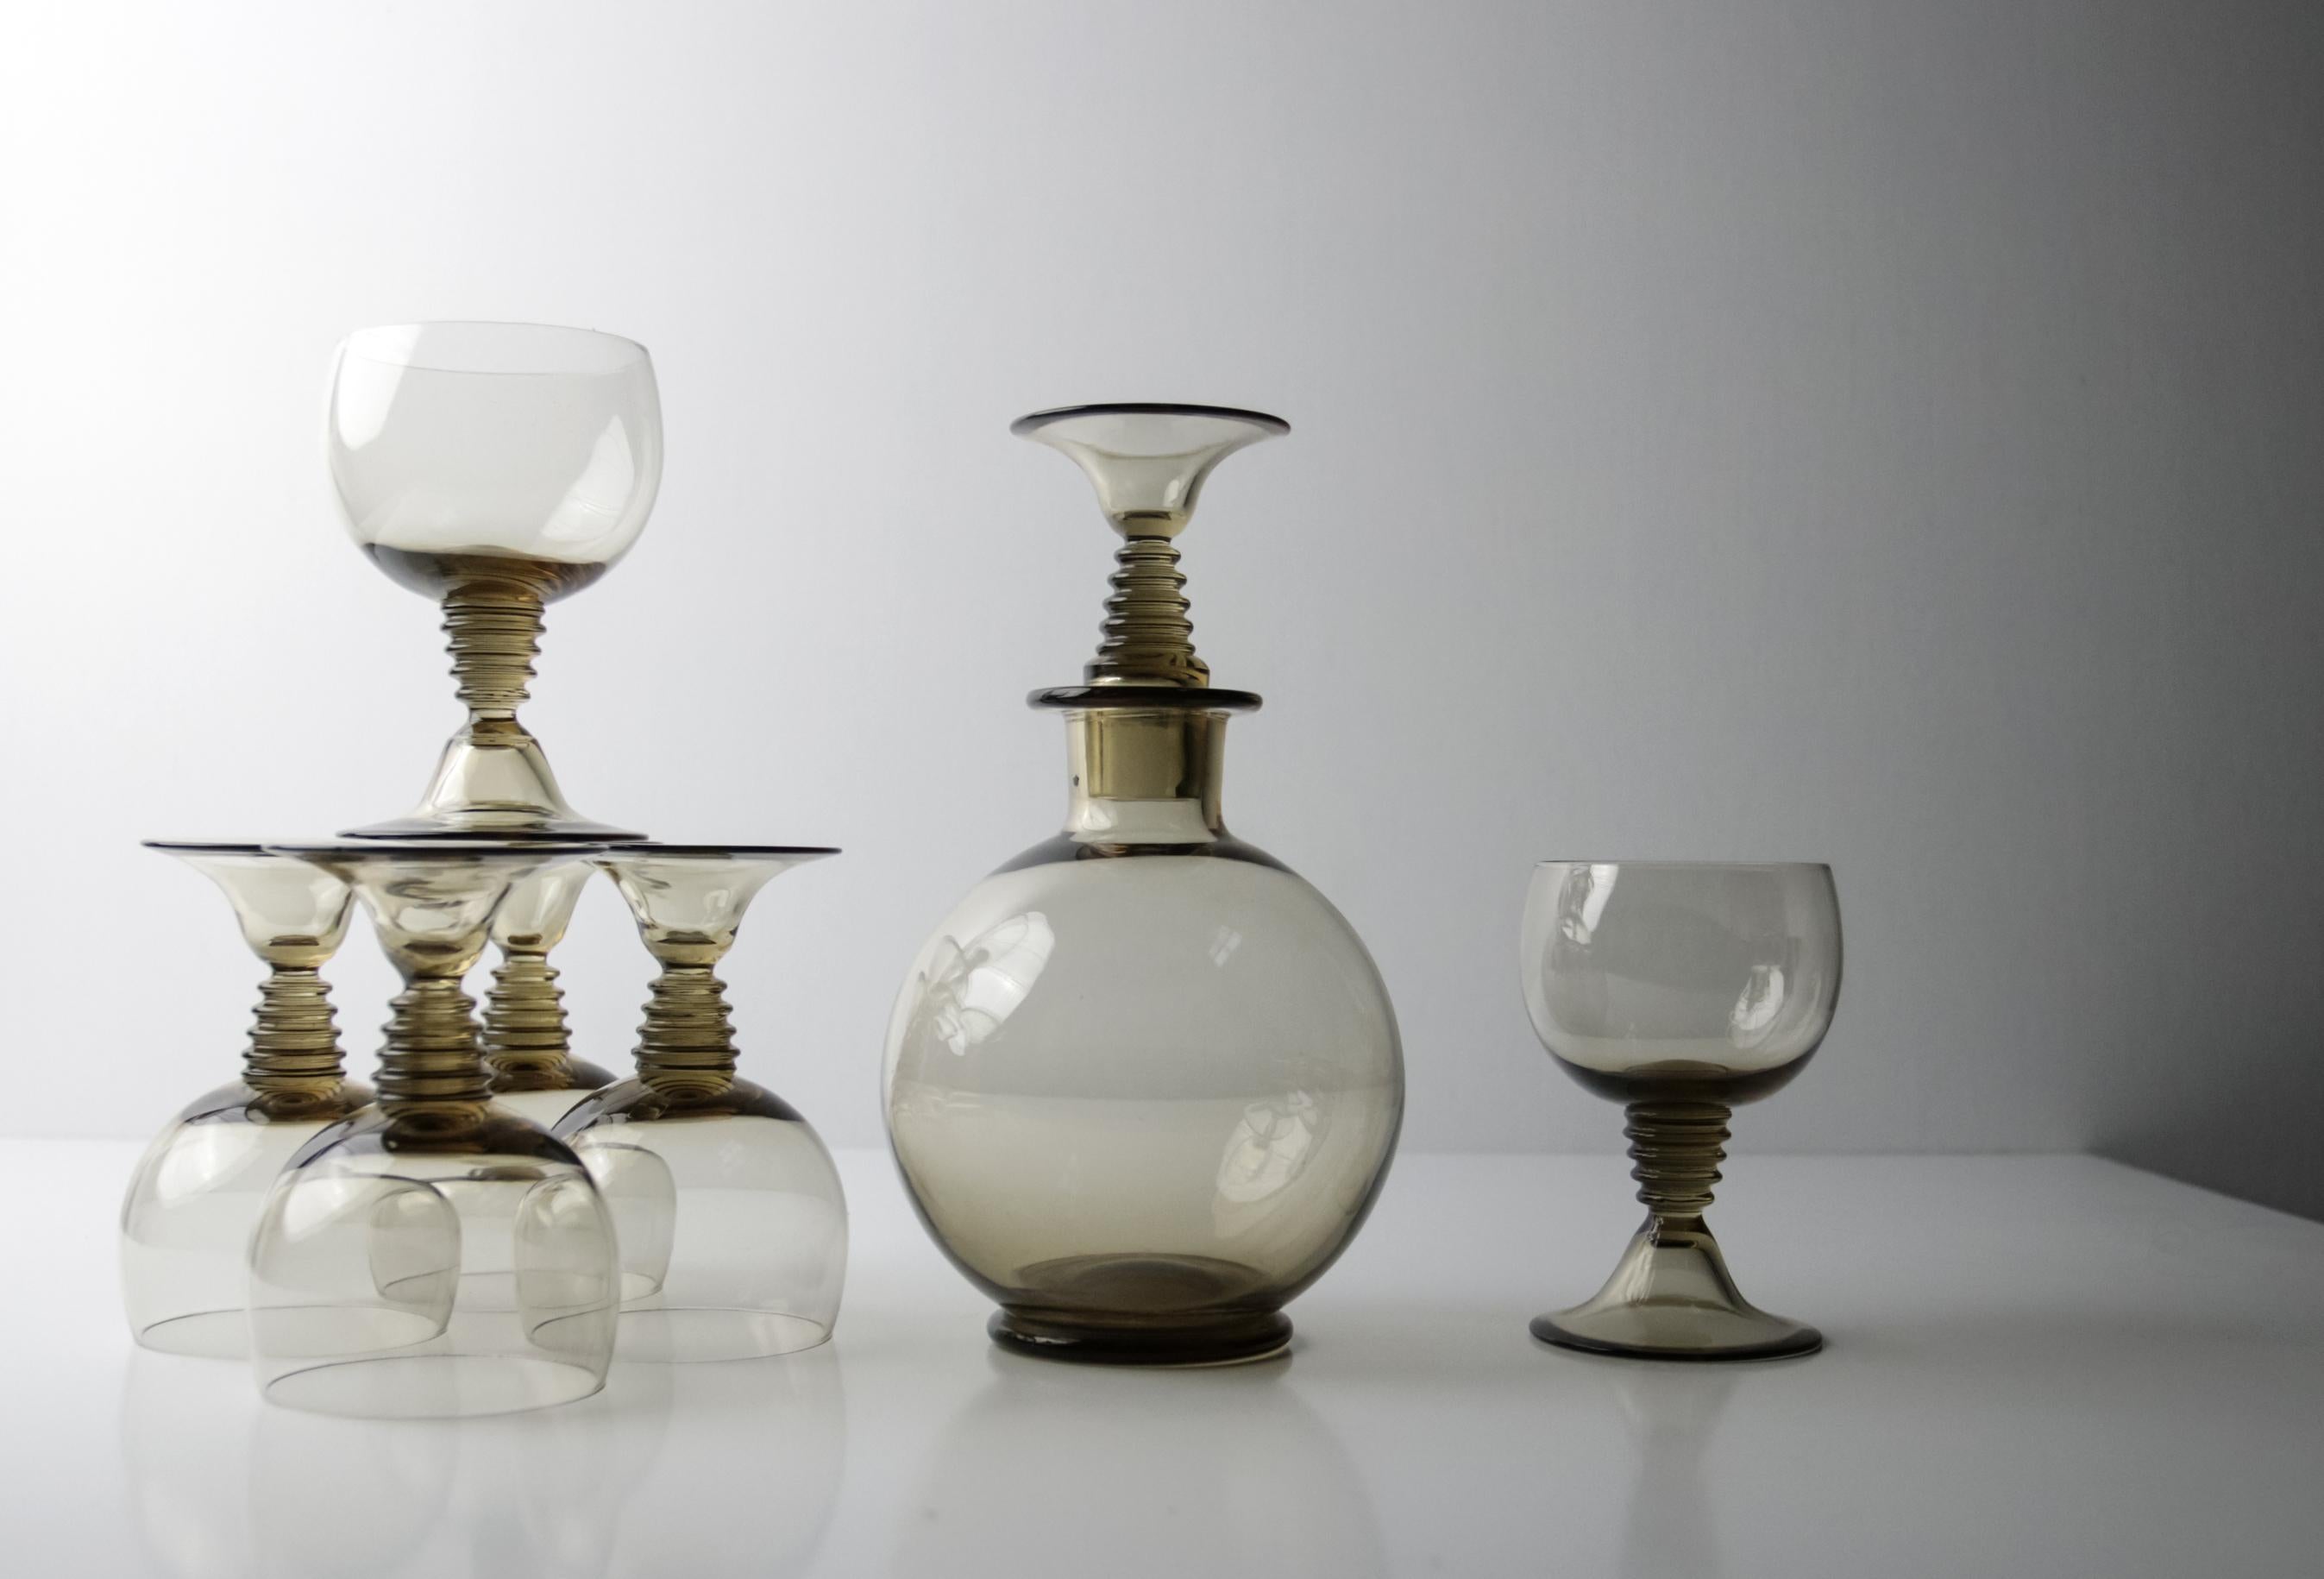 Beautiful Decanter (21cm high) and 6 normal size wine glasses designed by Willem Jacob Roozendaal in 1932 for Kristalunie Maastricht.
The set contains 7 pieces and all in a good condition with little traces of use.

Keywords: Christmas gift,